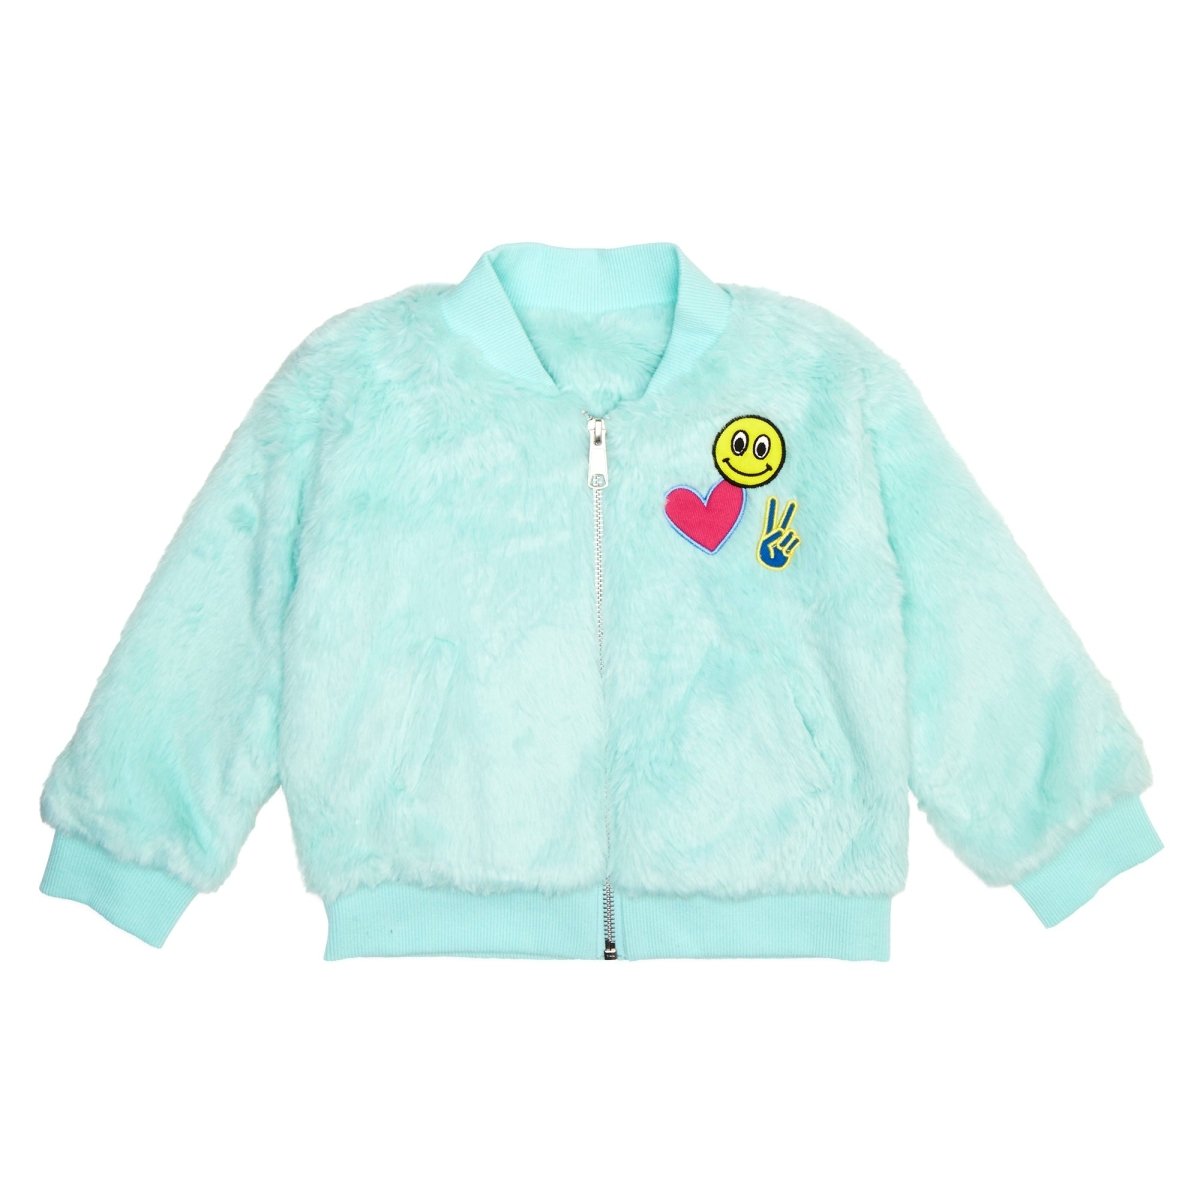 PATCHED ALLY FUZZY JACKET - CHASER KIDS